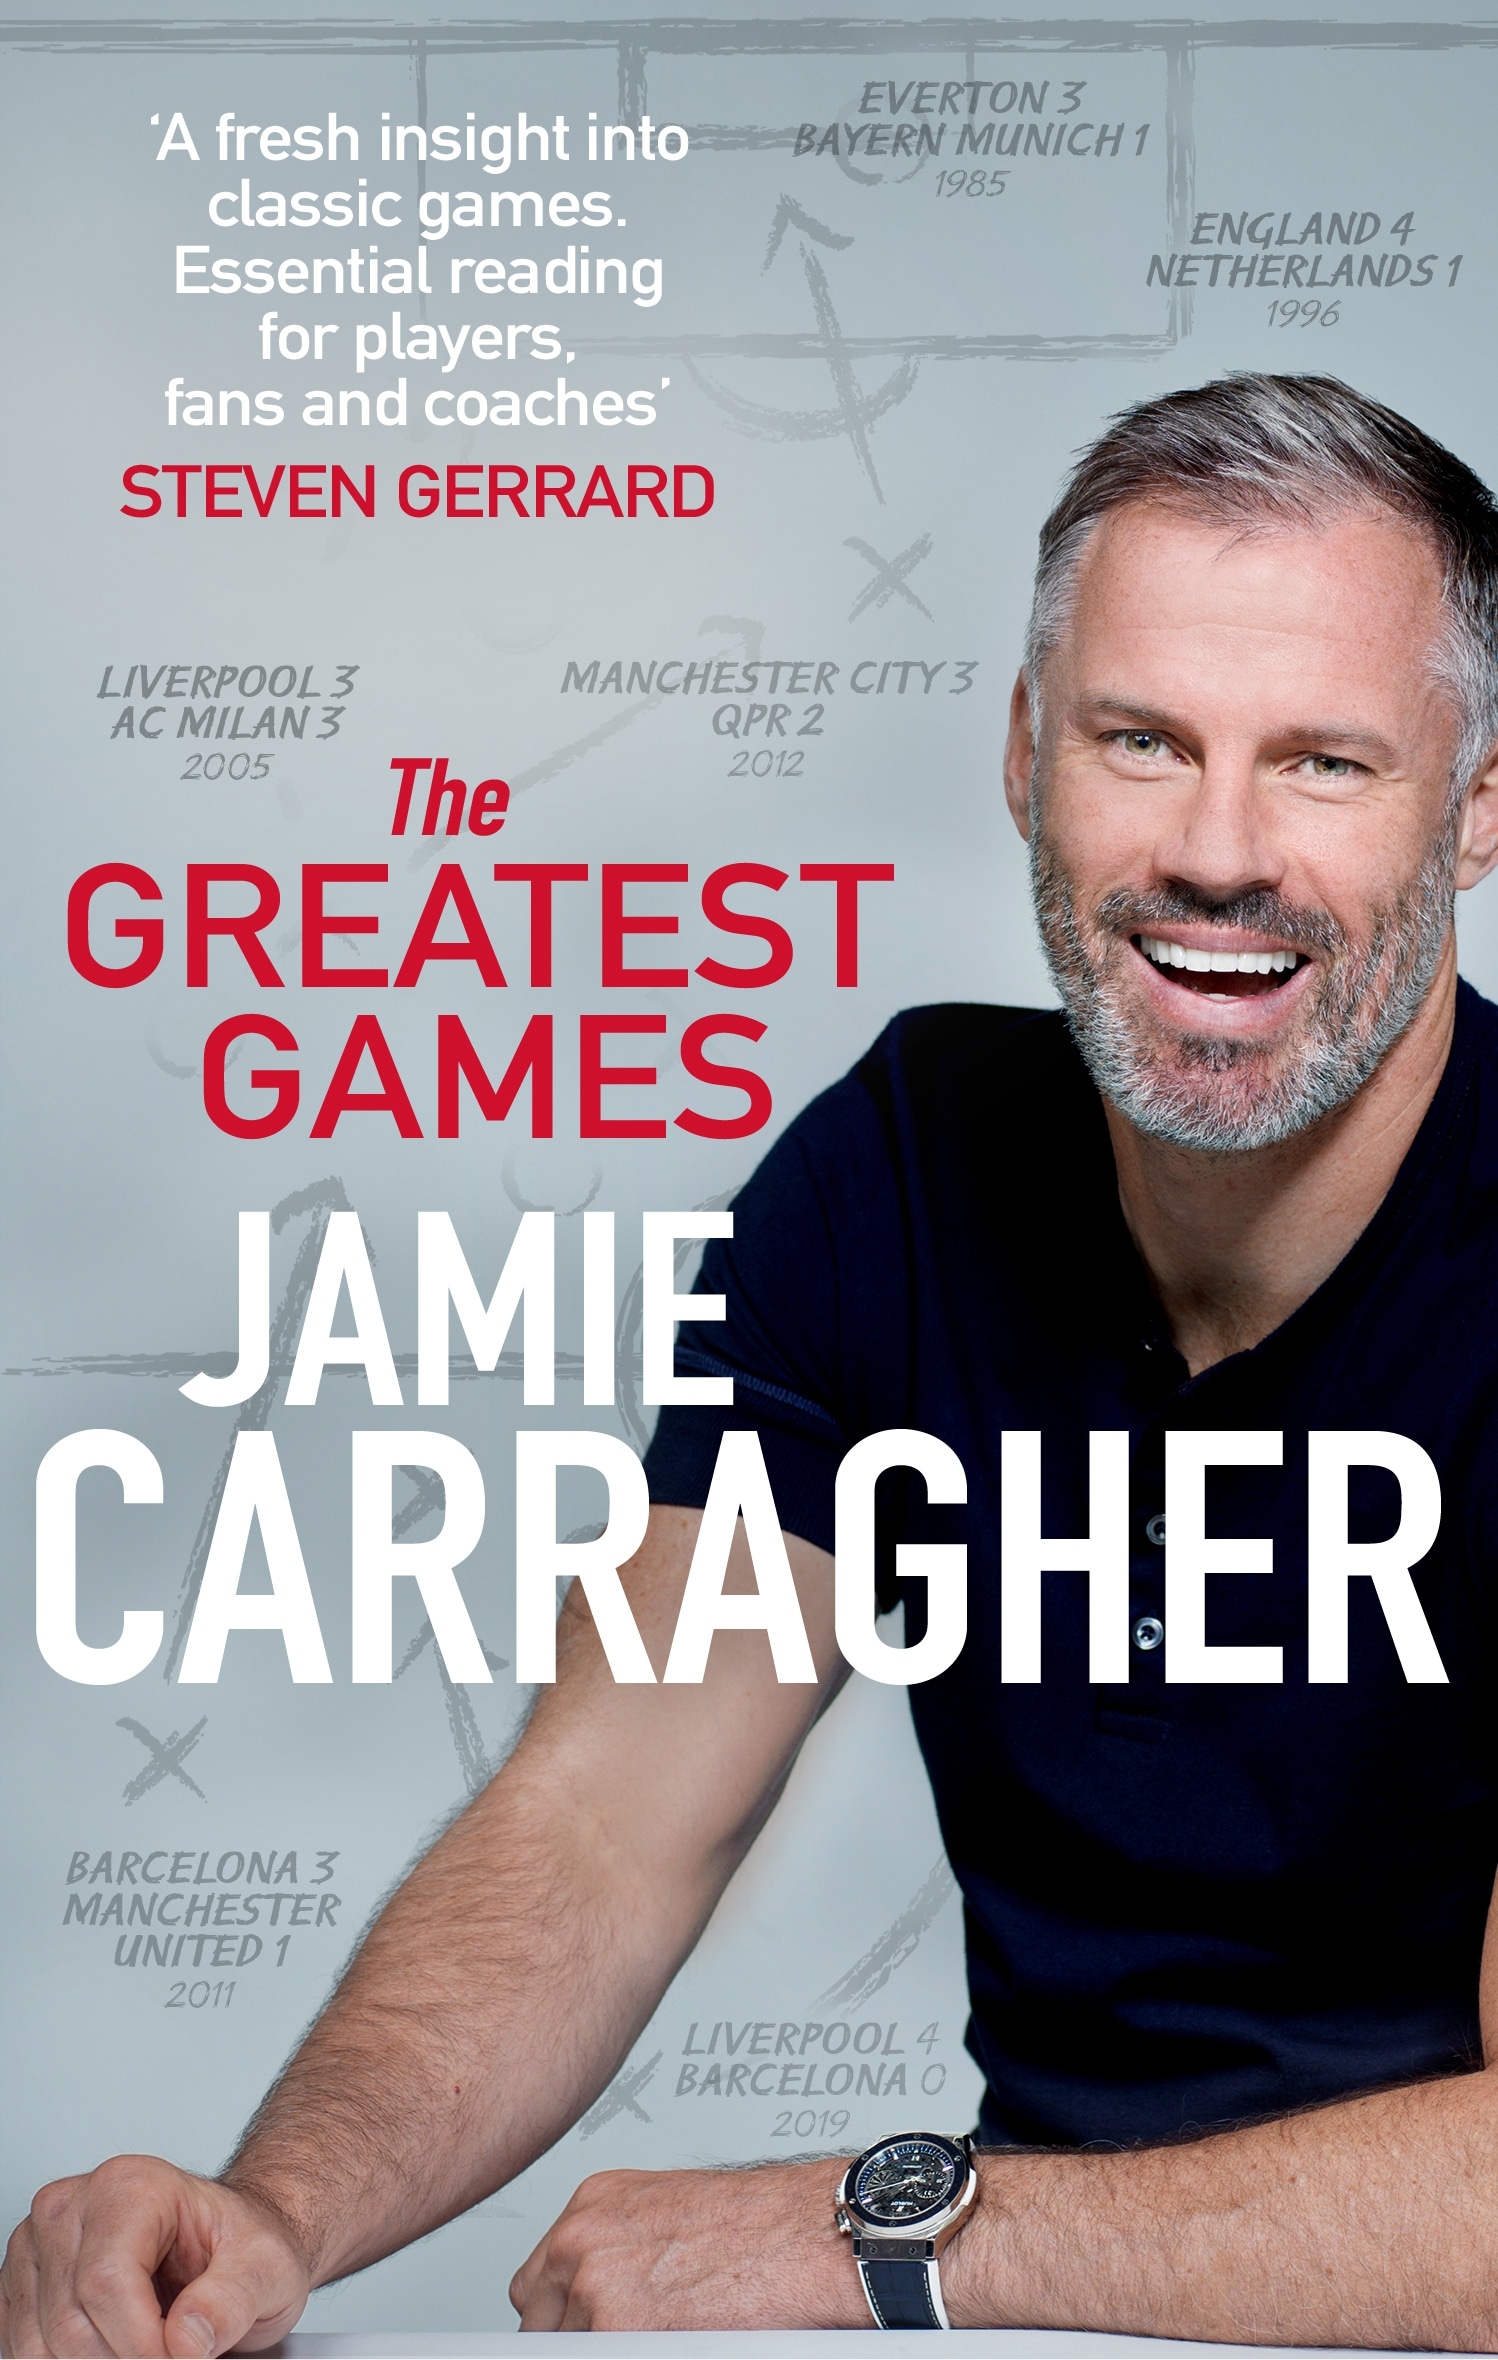 Book “The Greatest Games” by Jamie Carragher — August 19, 2021